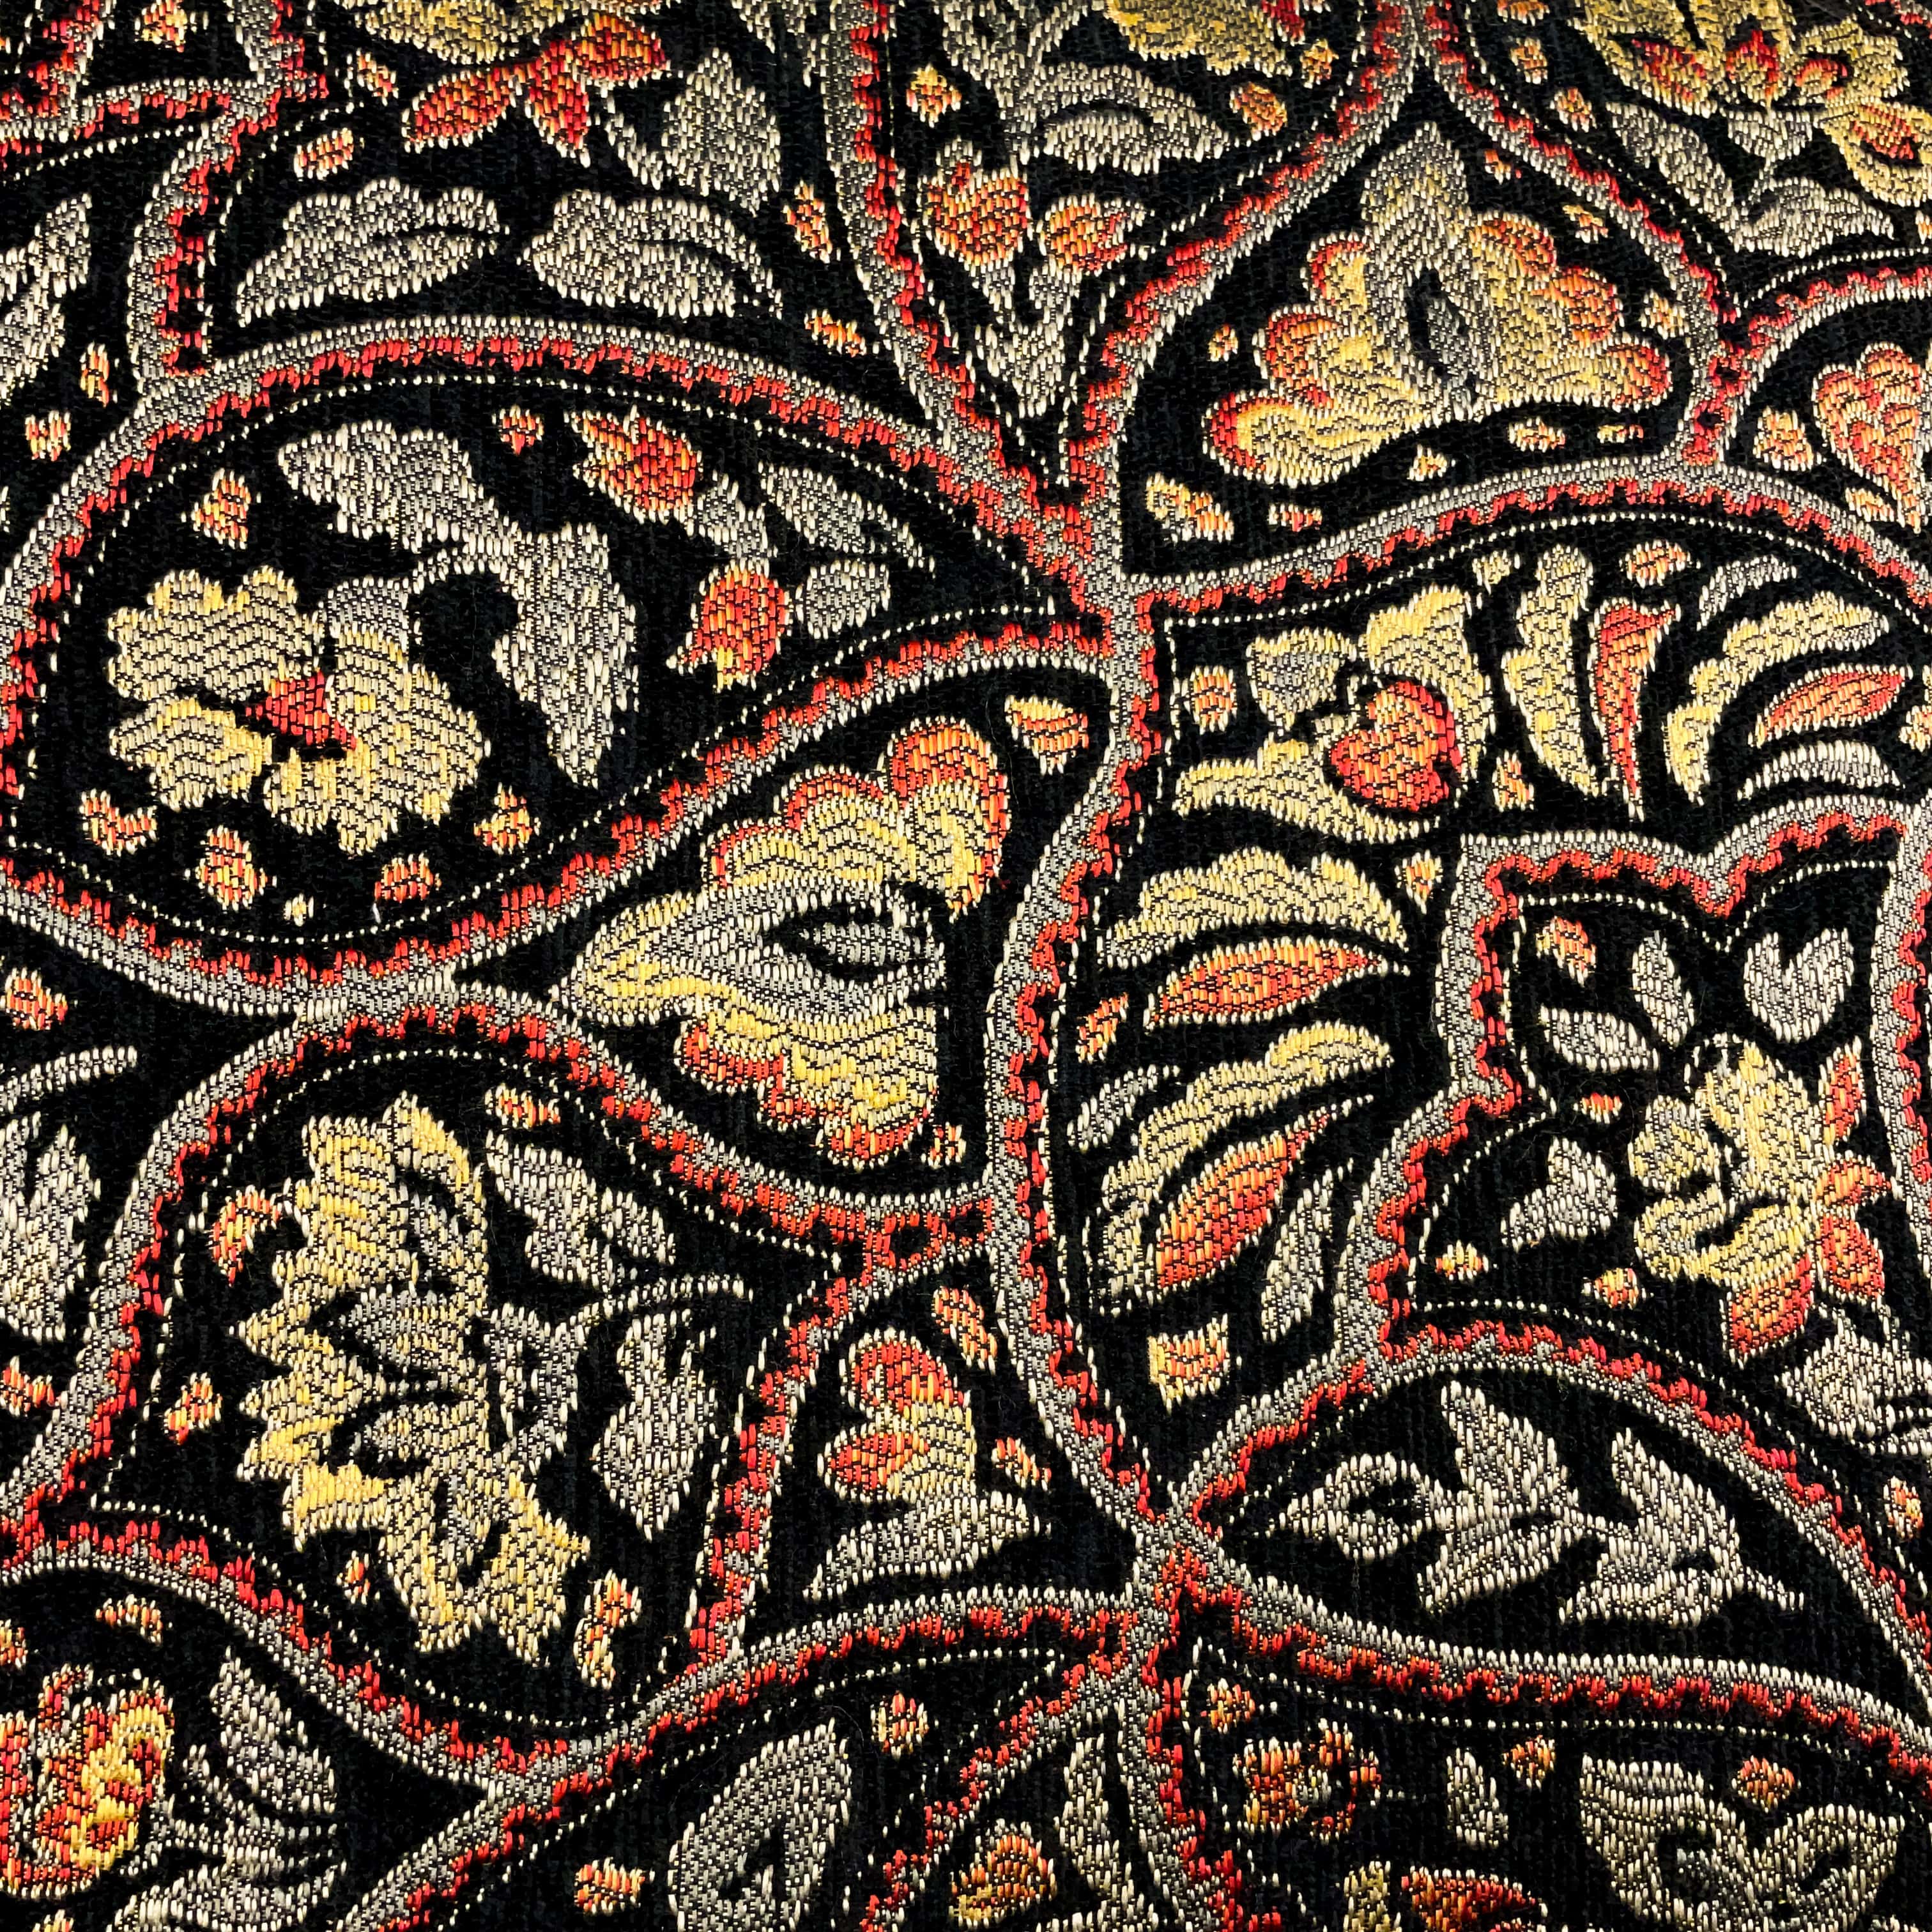 Fabric of a black floral embroidered cushion.